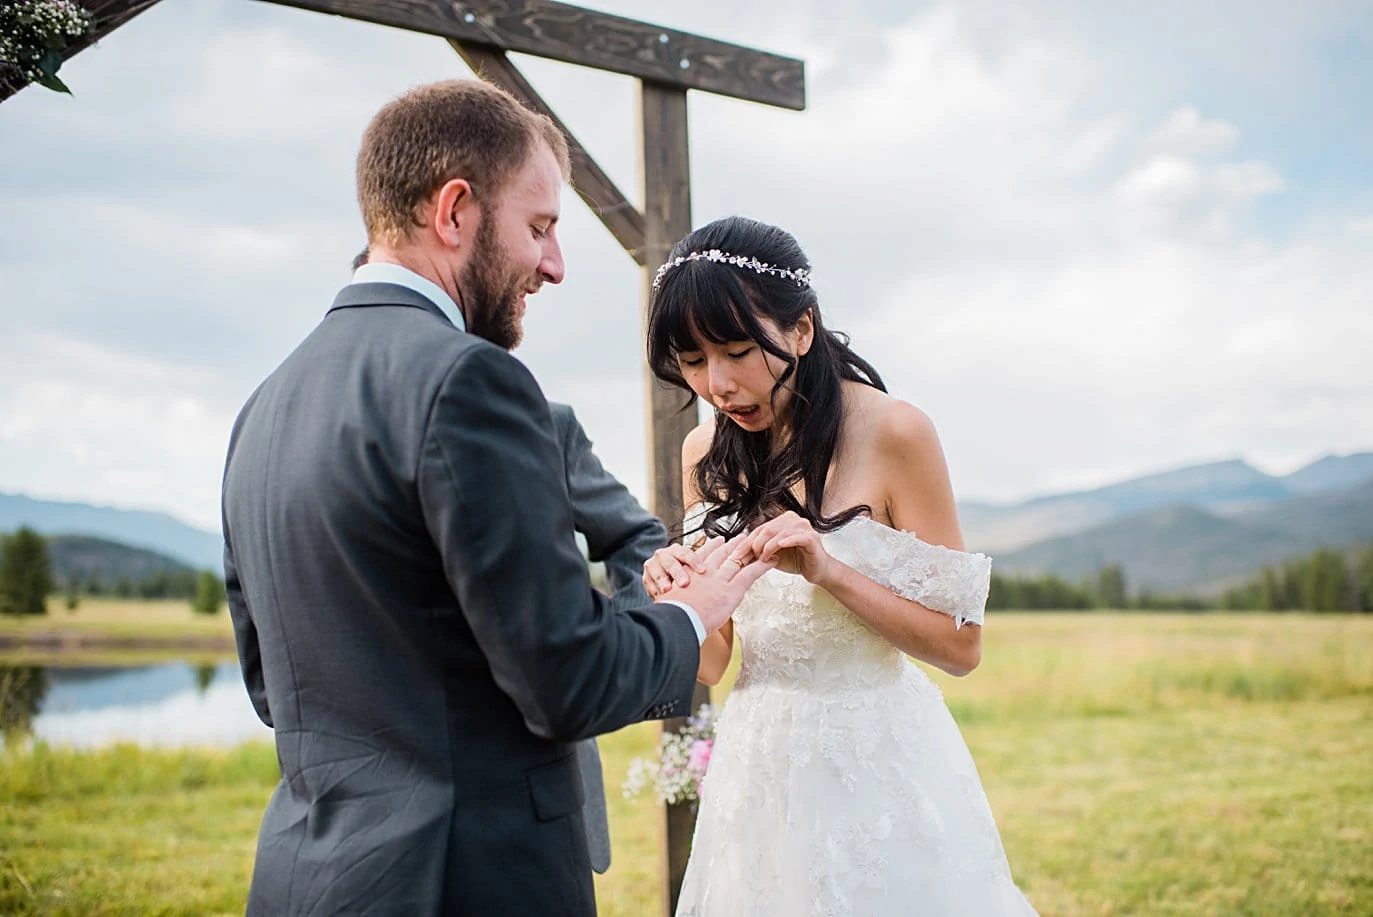 ring exchange in outdoor meadow ceremony at intimate Grand Lake wedding by Estes Park wedding photographer Jennie Crate